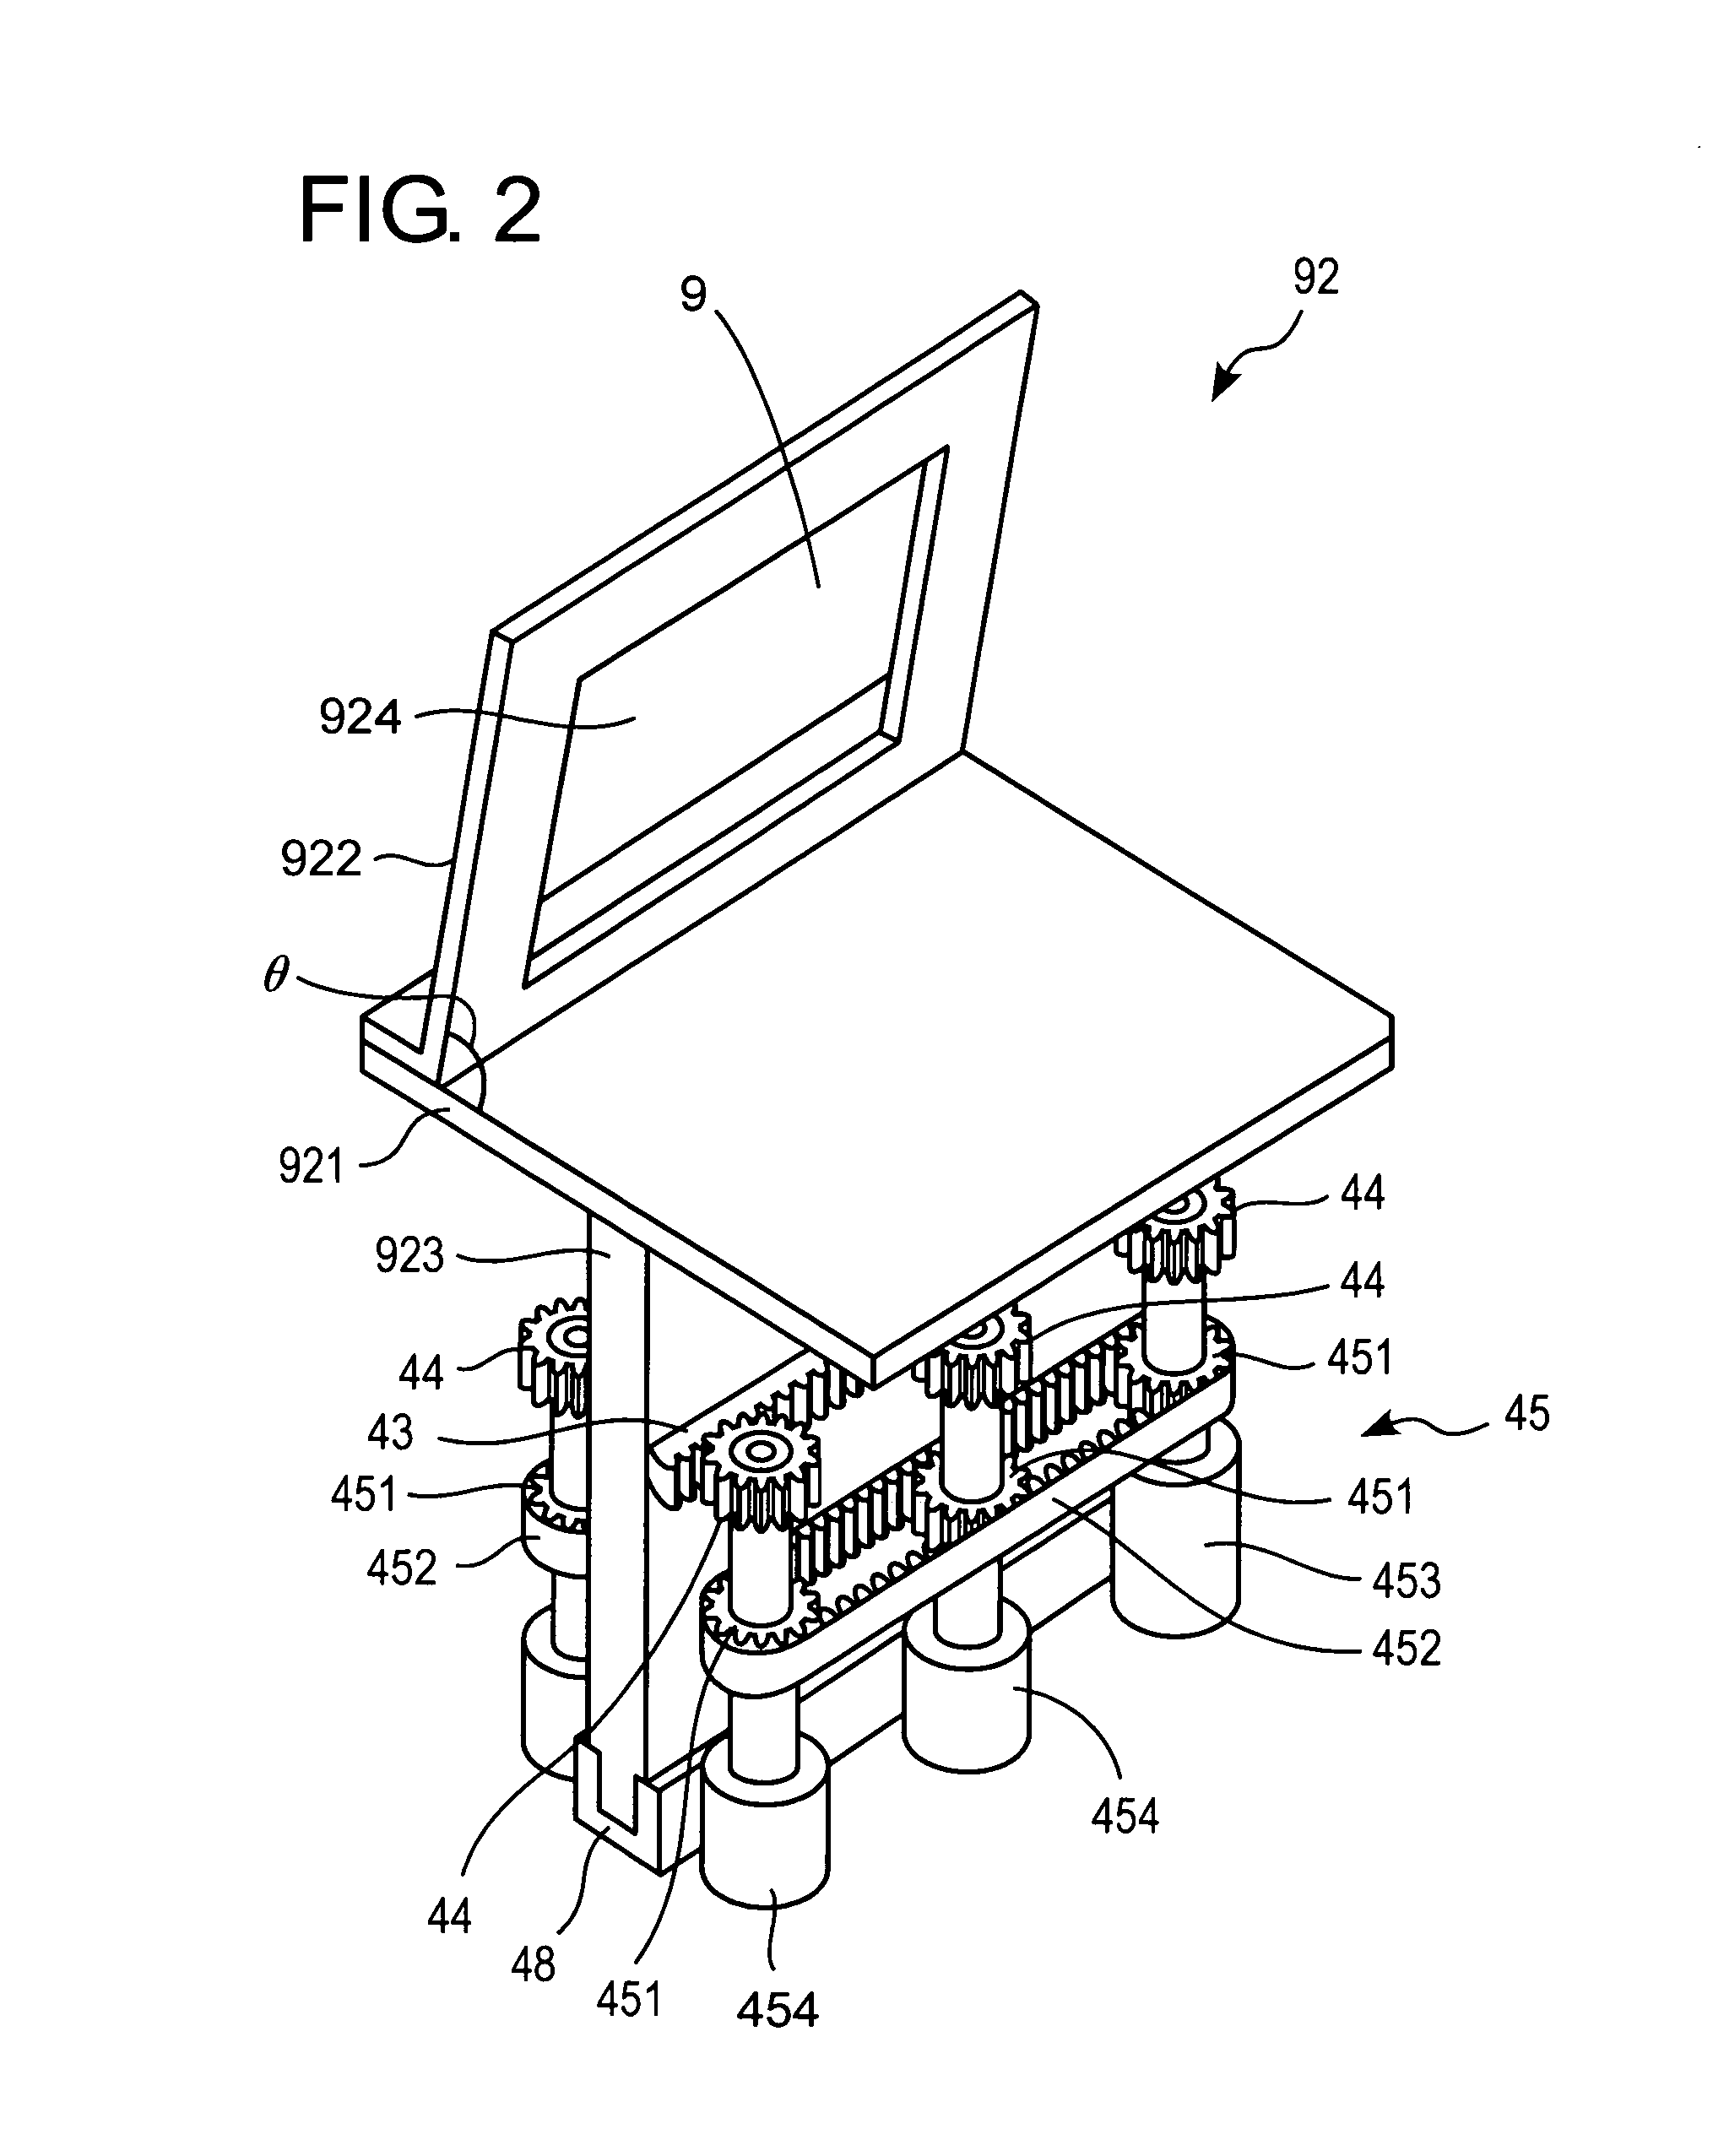 Interback-type substrate processing device